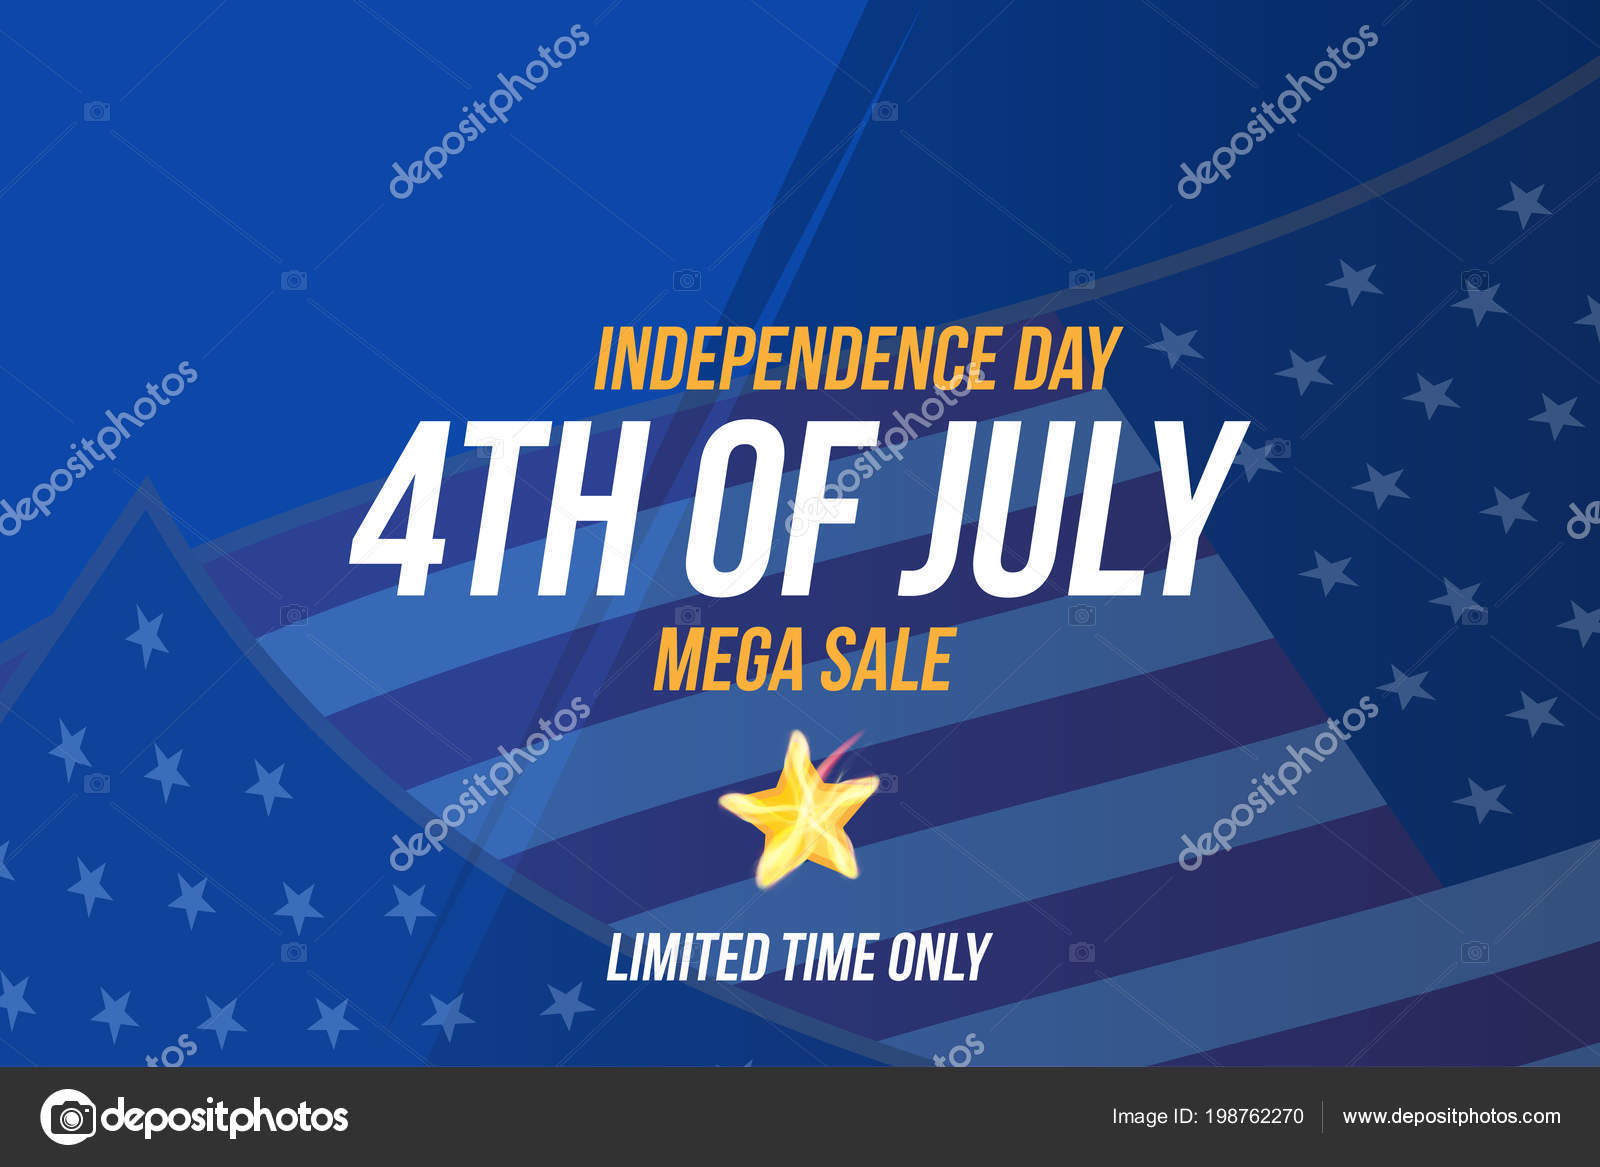 by　Stock　Day　4Th　Happy　Flyer　Horizontal　Vector　July　198762270　Format　Mega　Celebrate　Independence